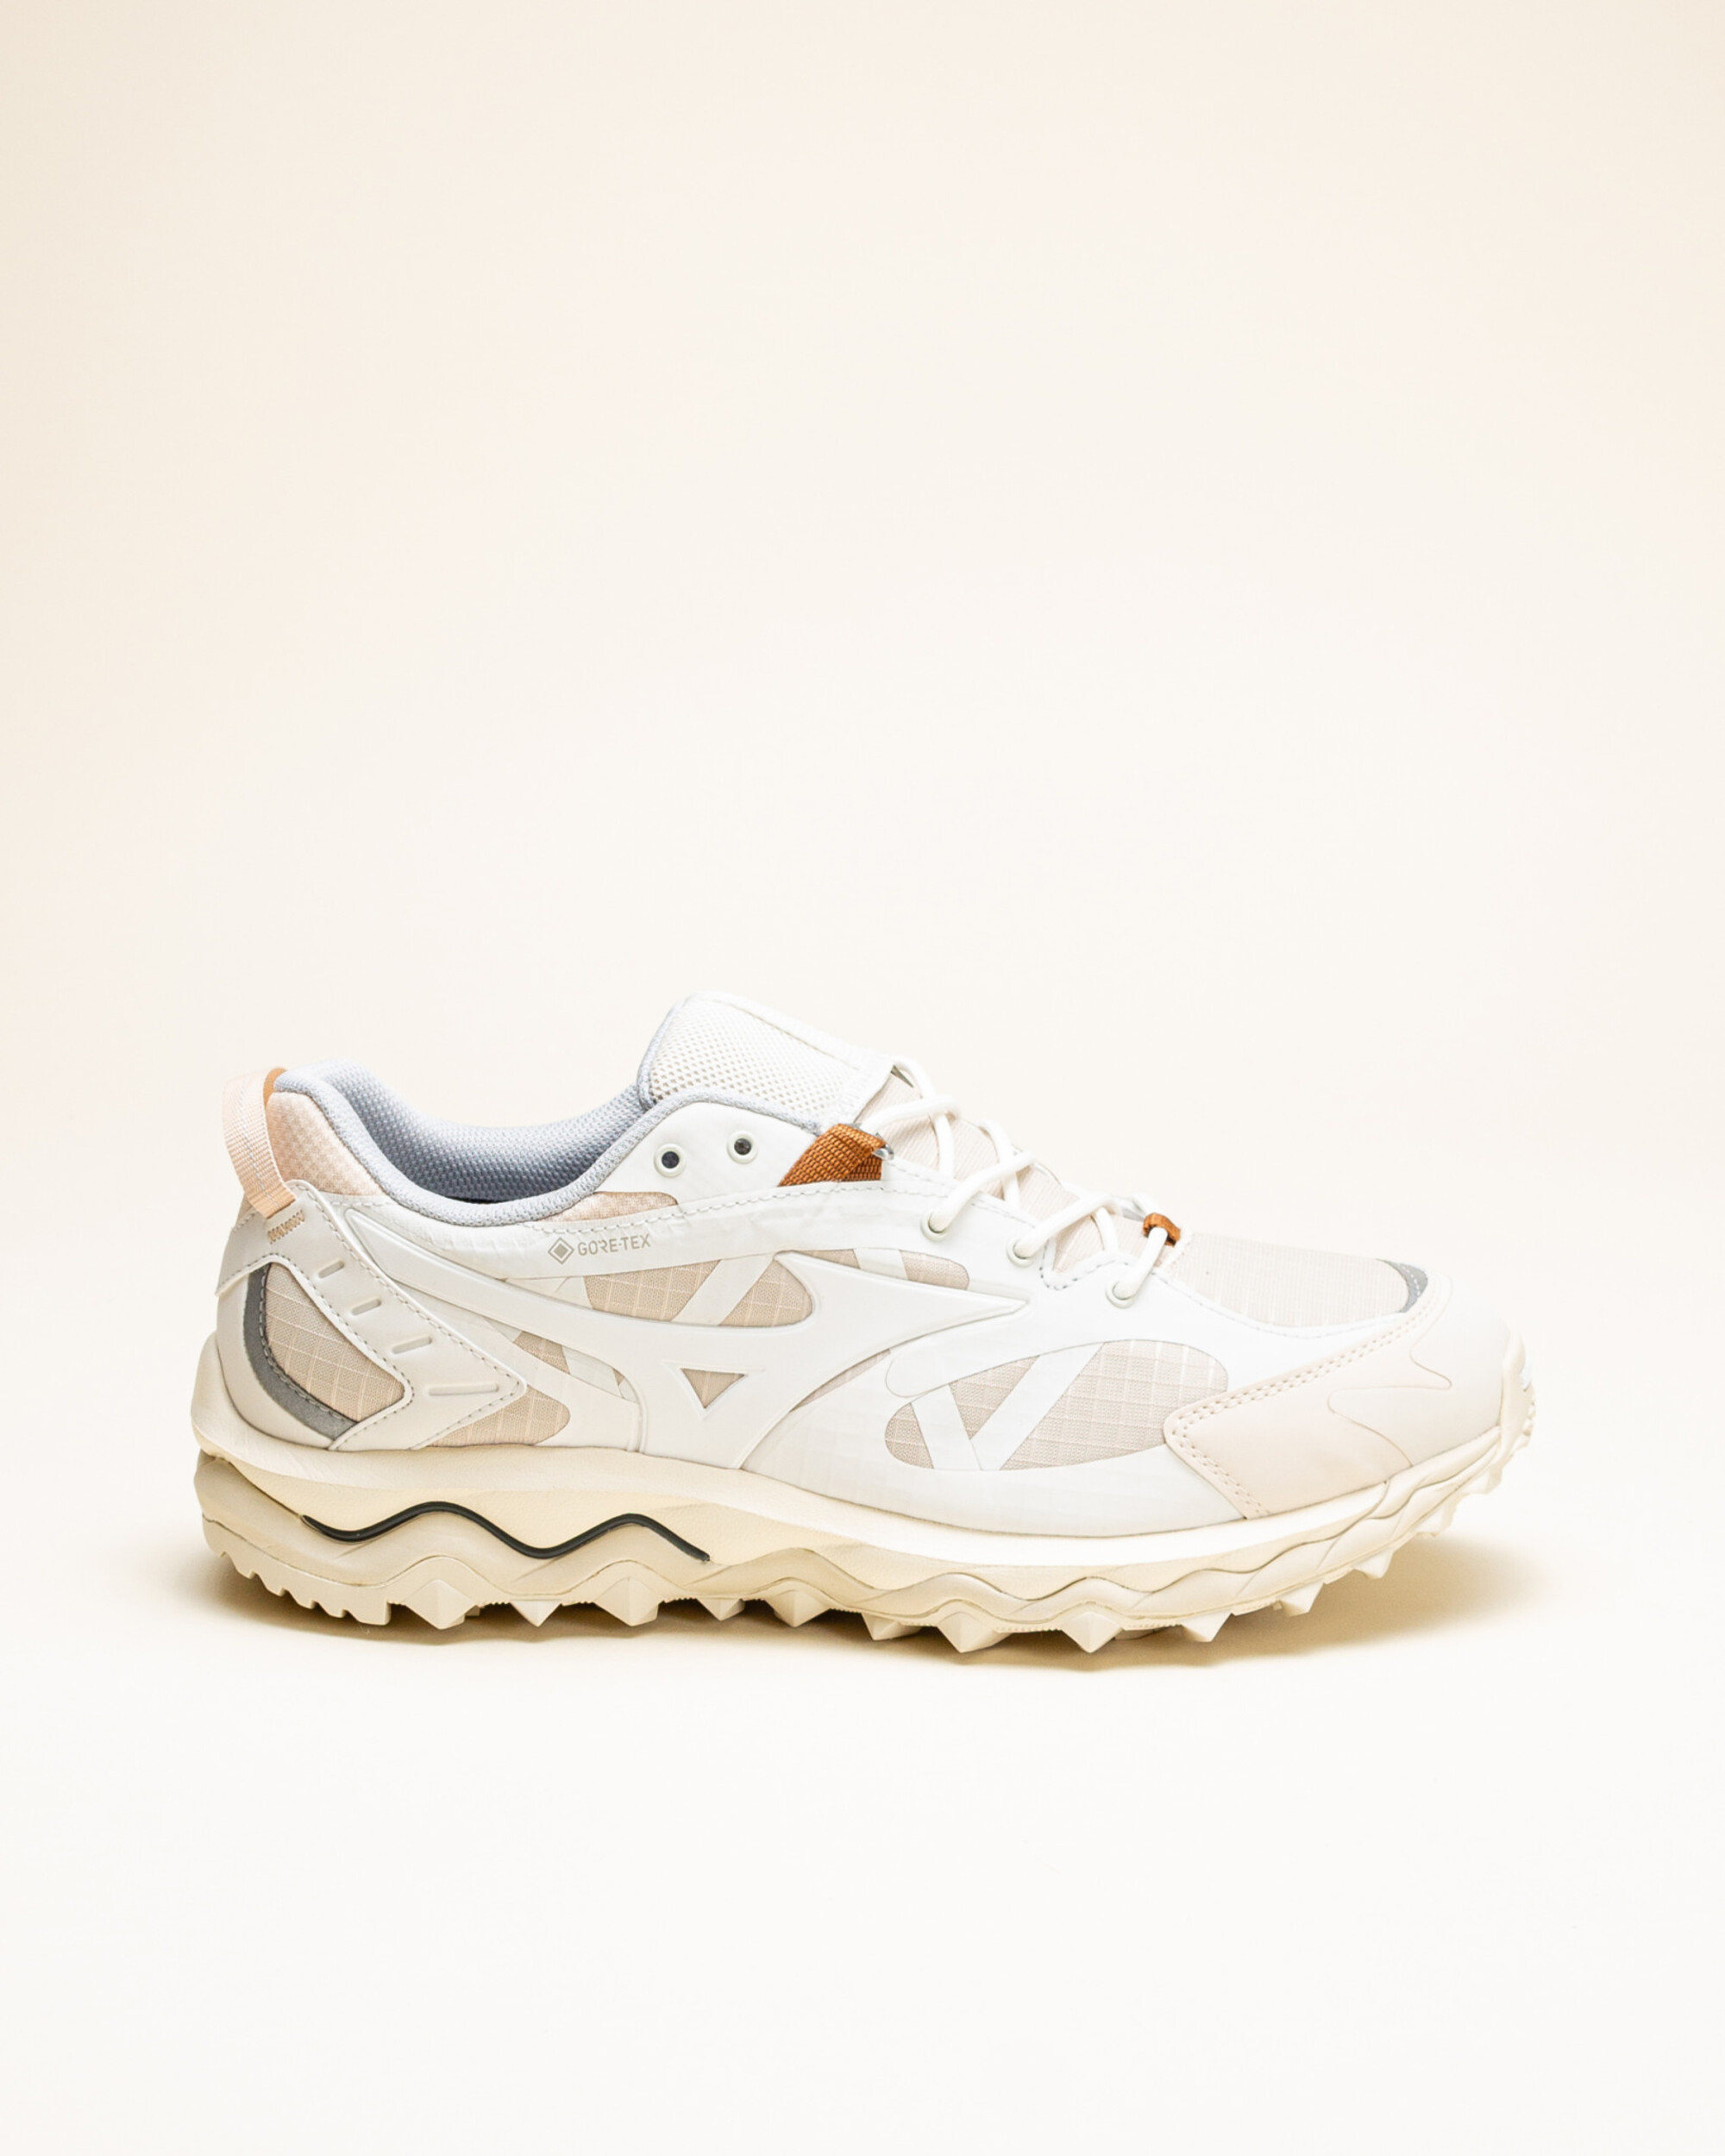 Mizuno Wave Mujin TL GTX - Summer Sand/White/Mother of Pearl